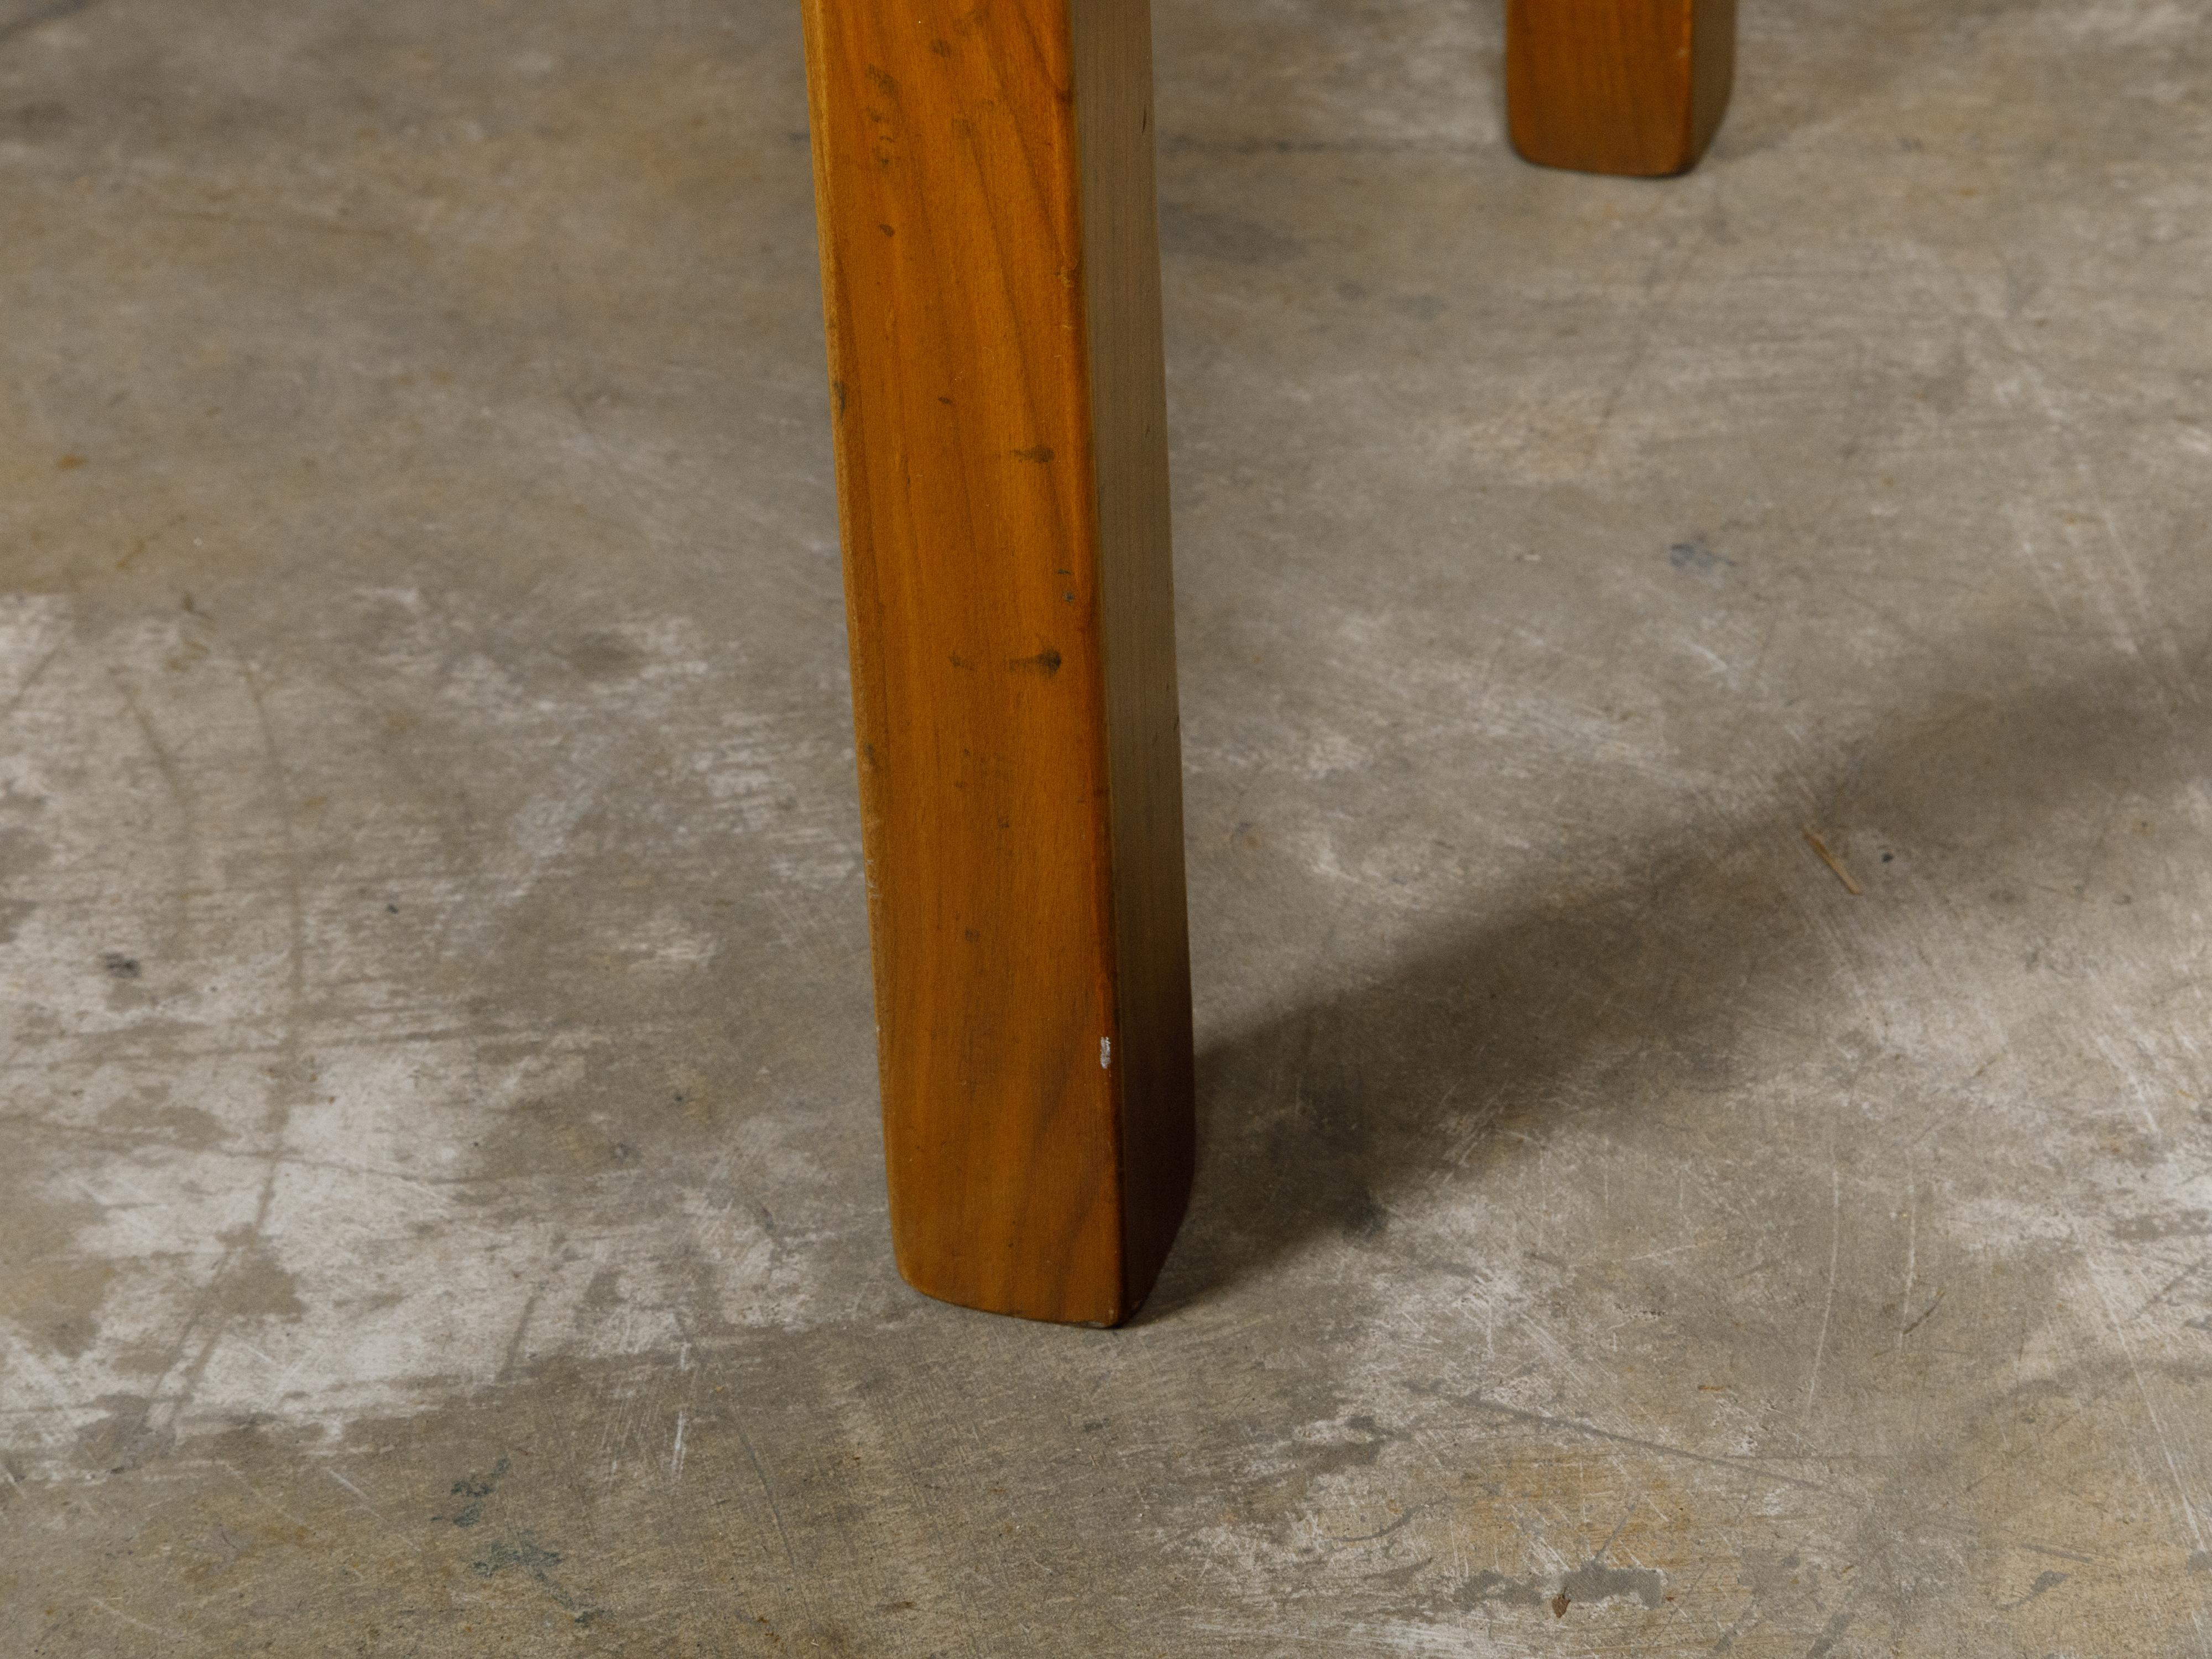 English Campaign Yew Wood 1920s Side Table with Brass Accents and Straight Legs For Sale 1